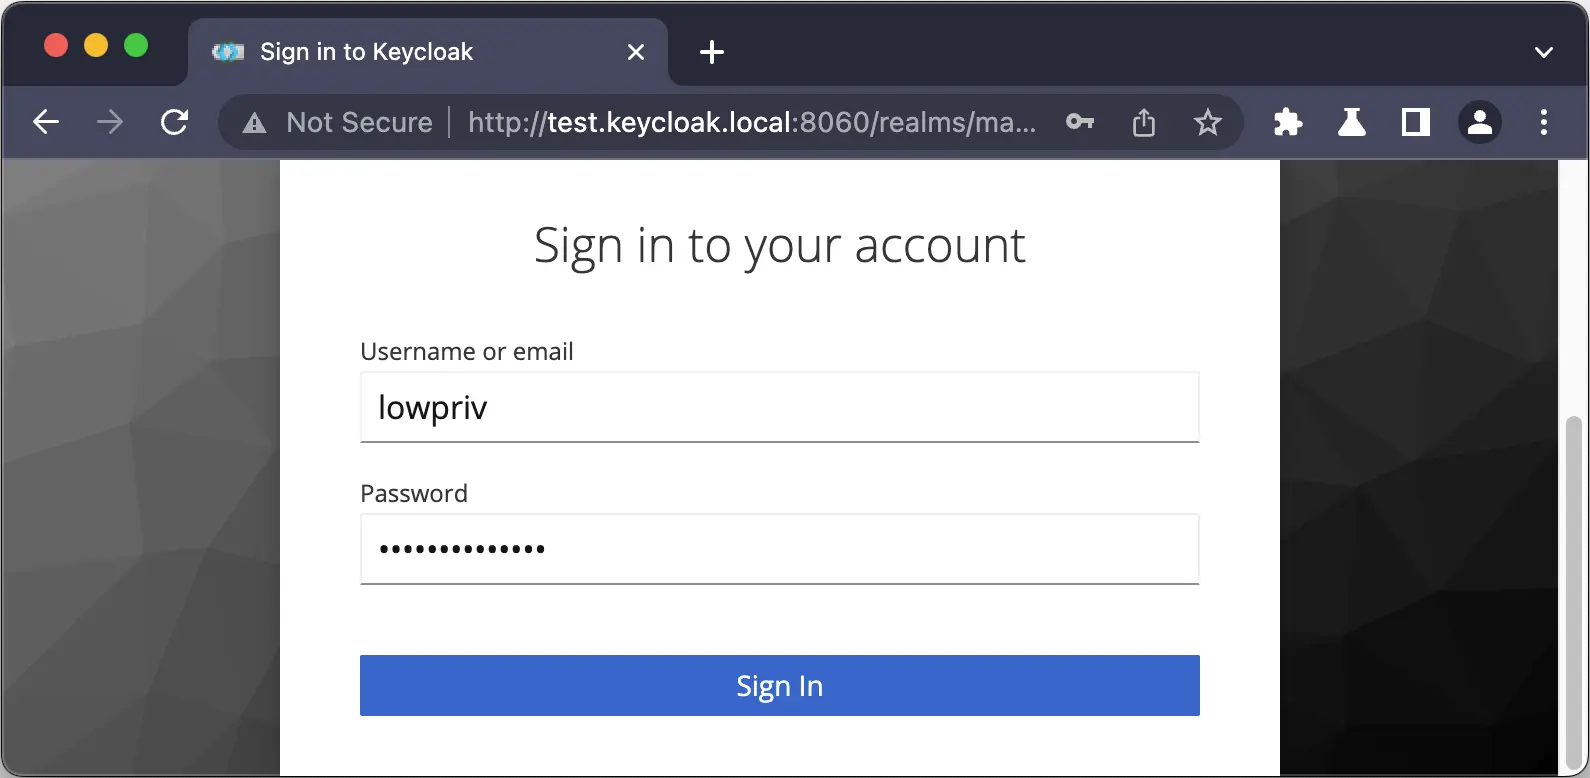 Login into Keycloak with low privileged account